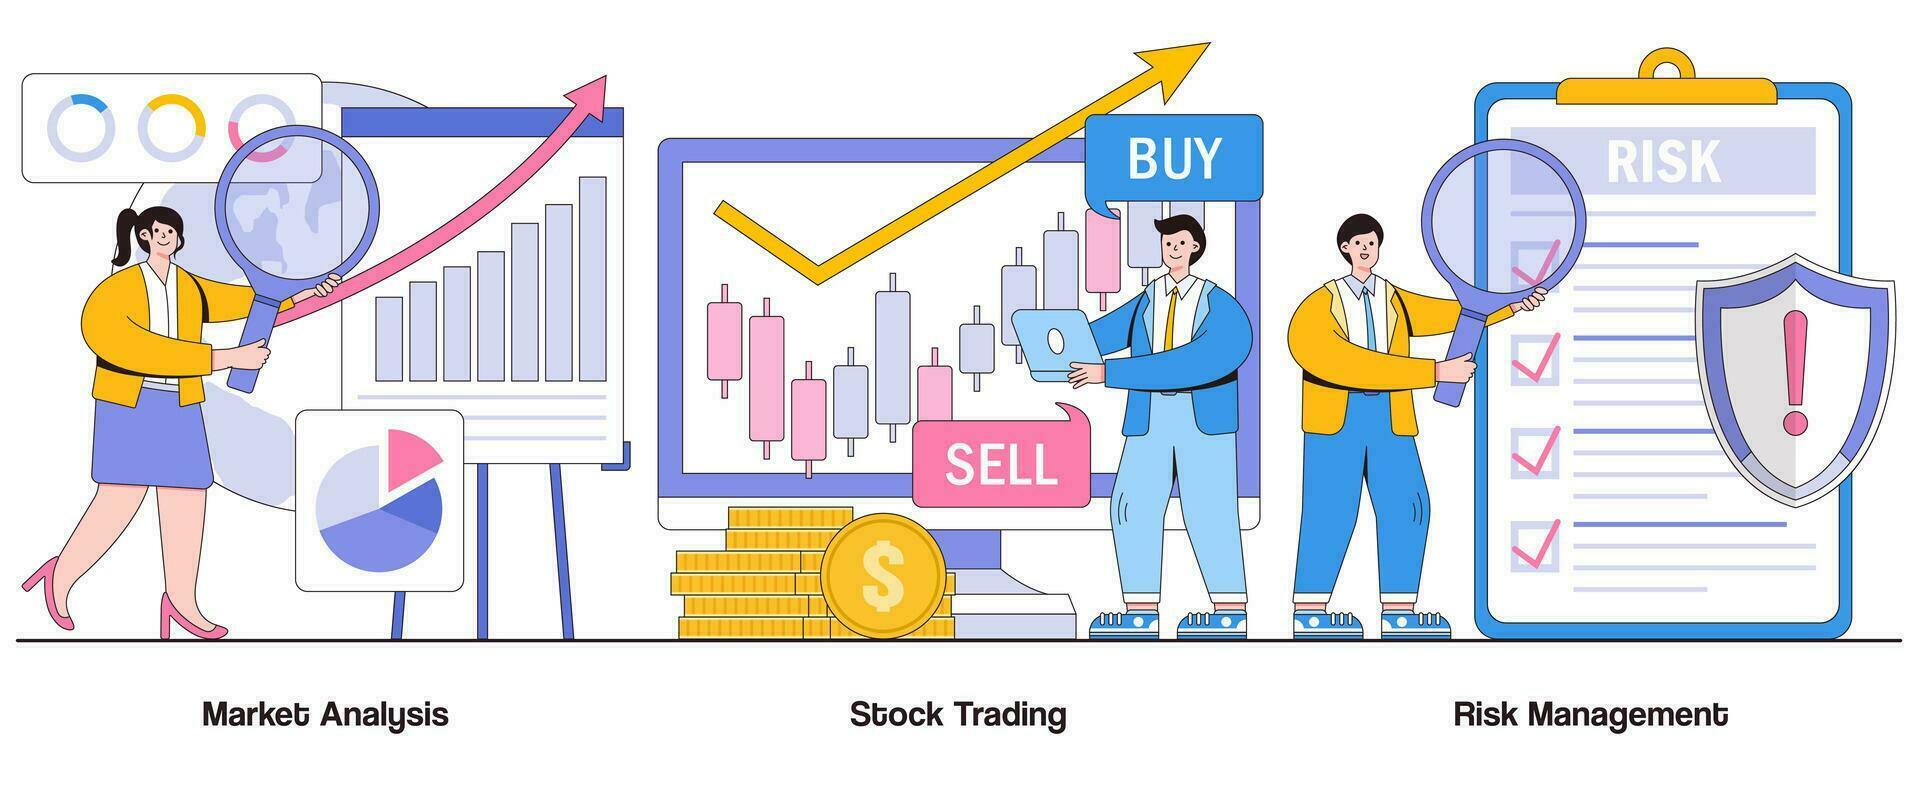 Market analysis, stock trading, risk management concept with character. Investment strategies abstract vector illustration set. Portfolio diversification, risk assessment, financial market metaphor